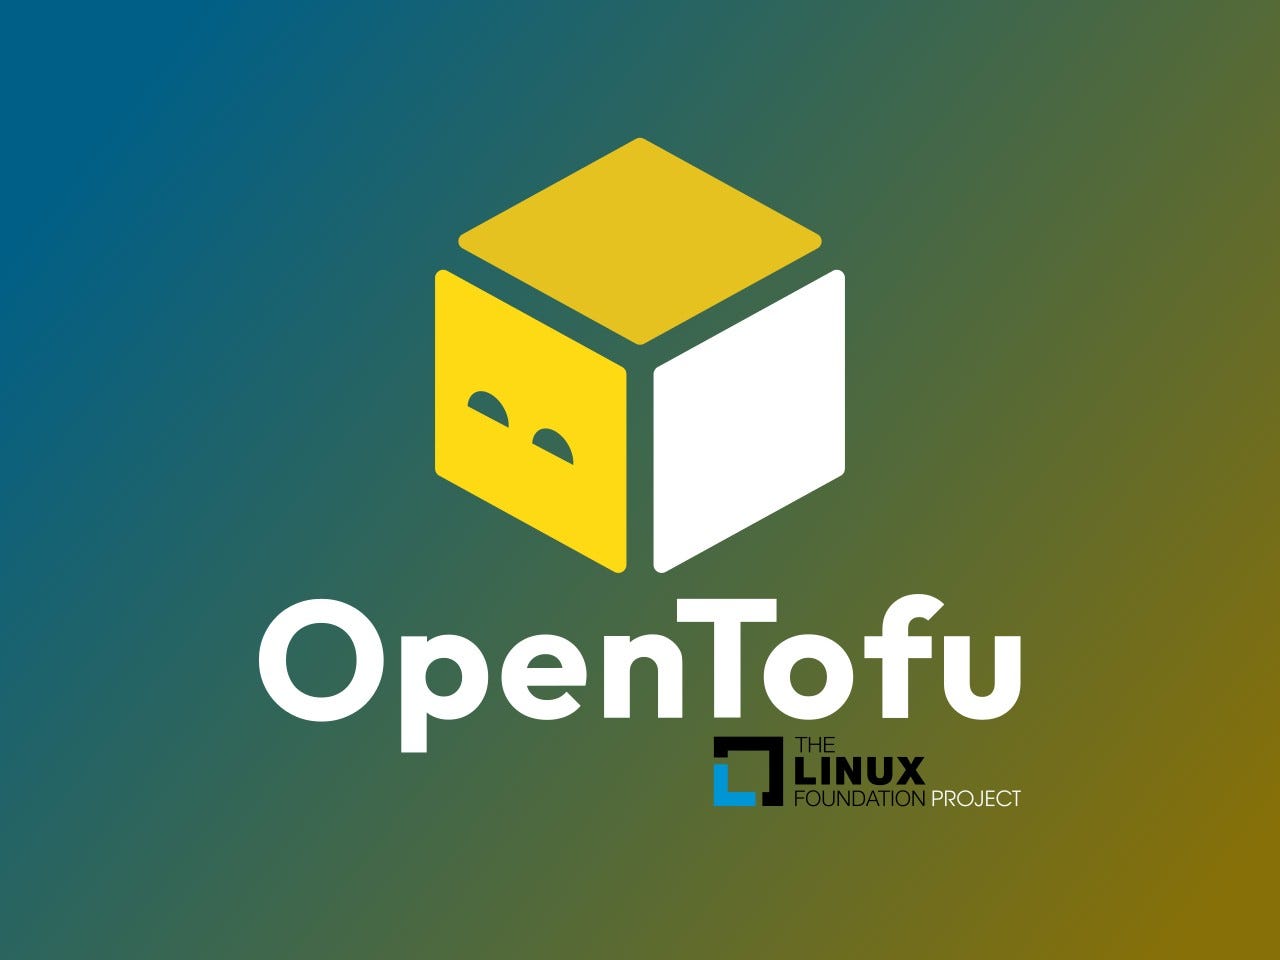 Installing and working with OpenTofu for provisioning Azure resources